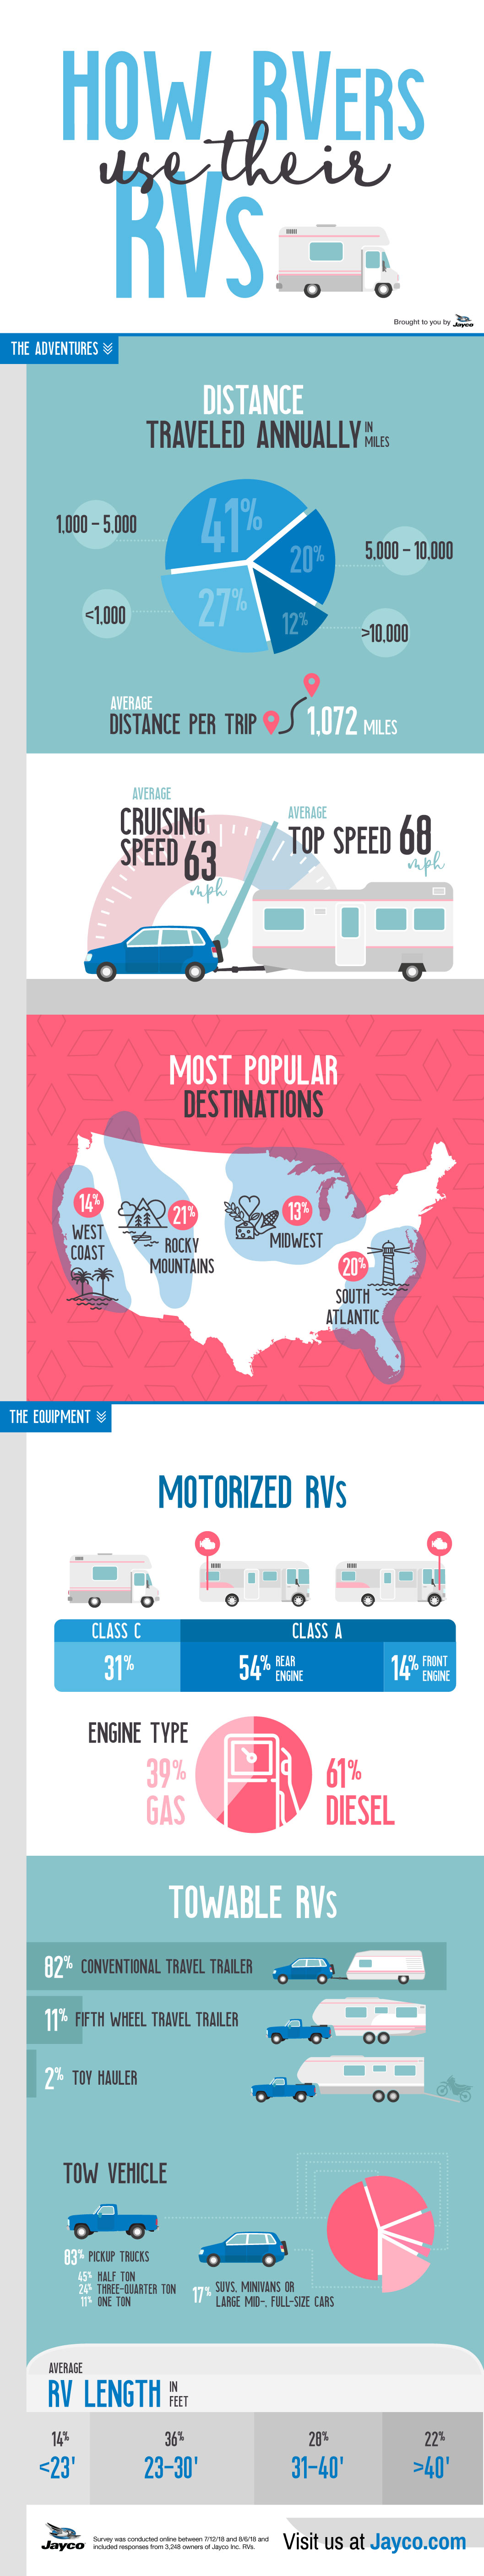 stats on how people use their RVs